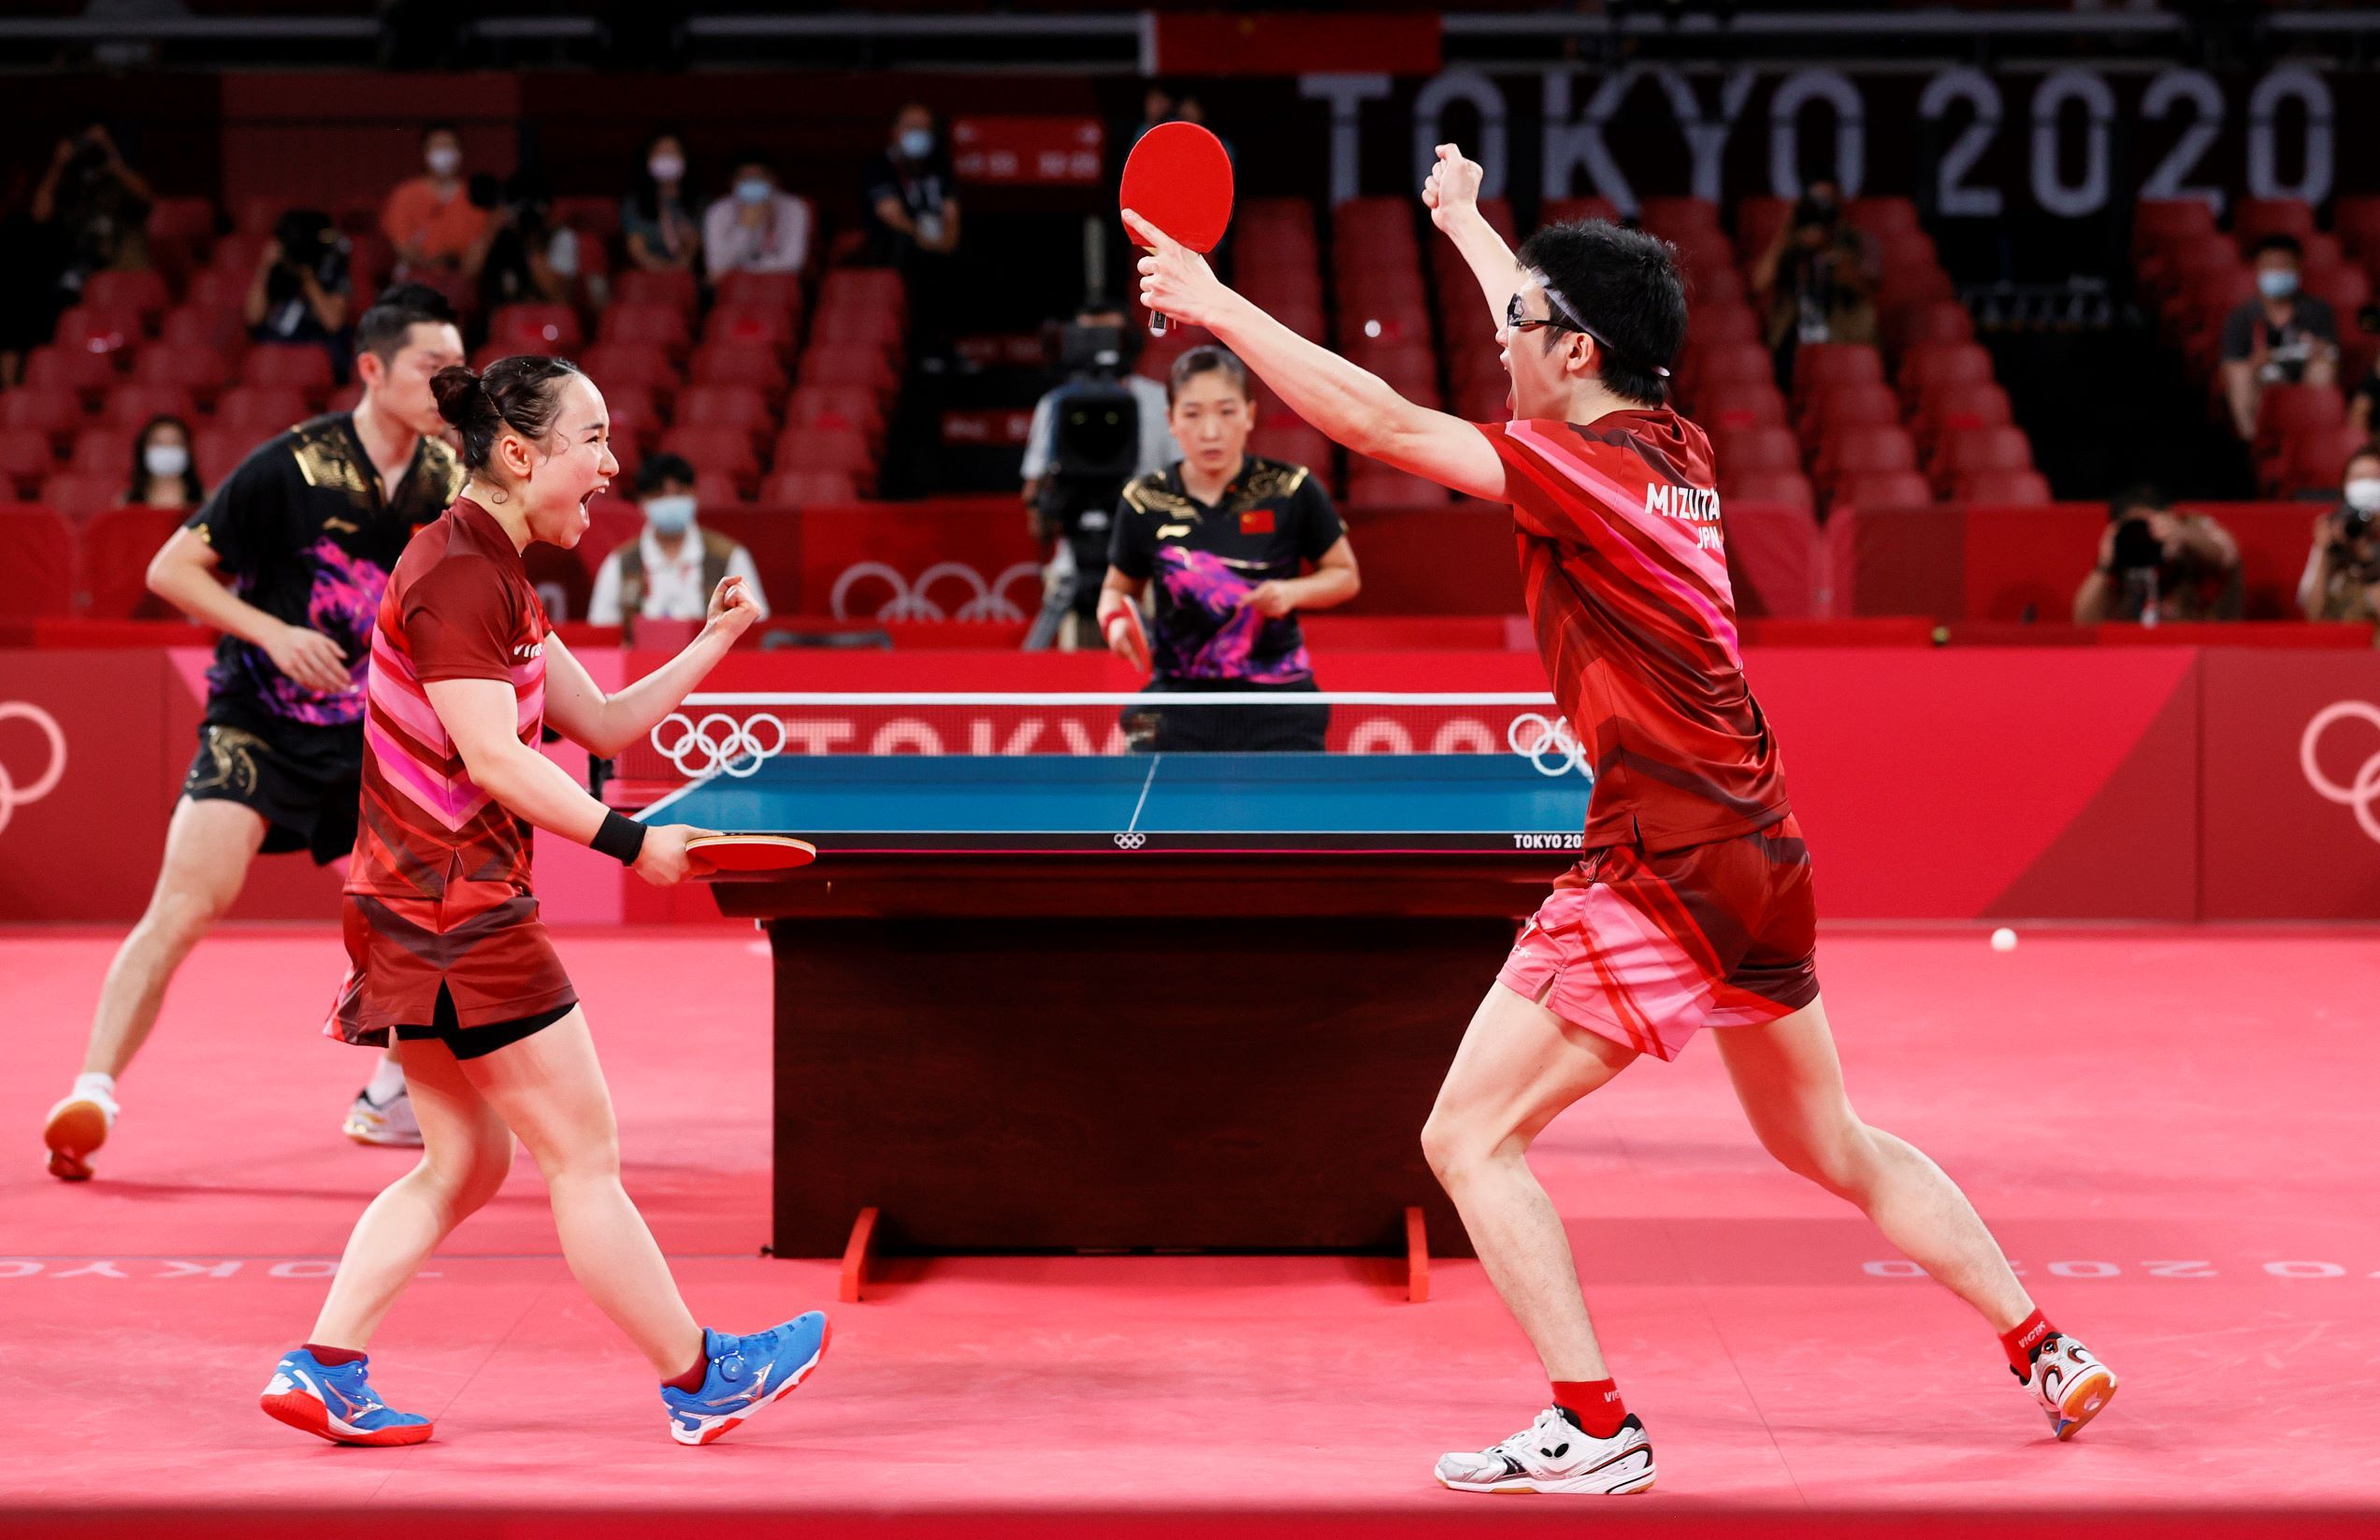 Allegations It's lucky that Relationship Table tennis - Paris 2024